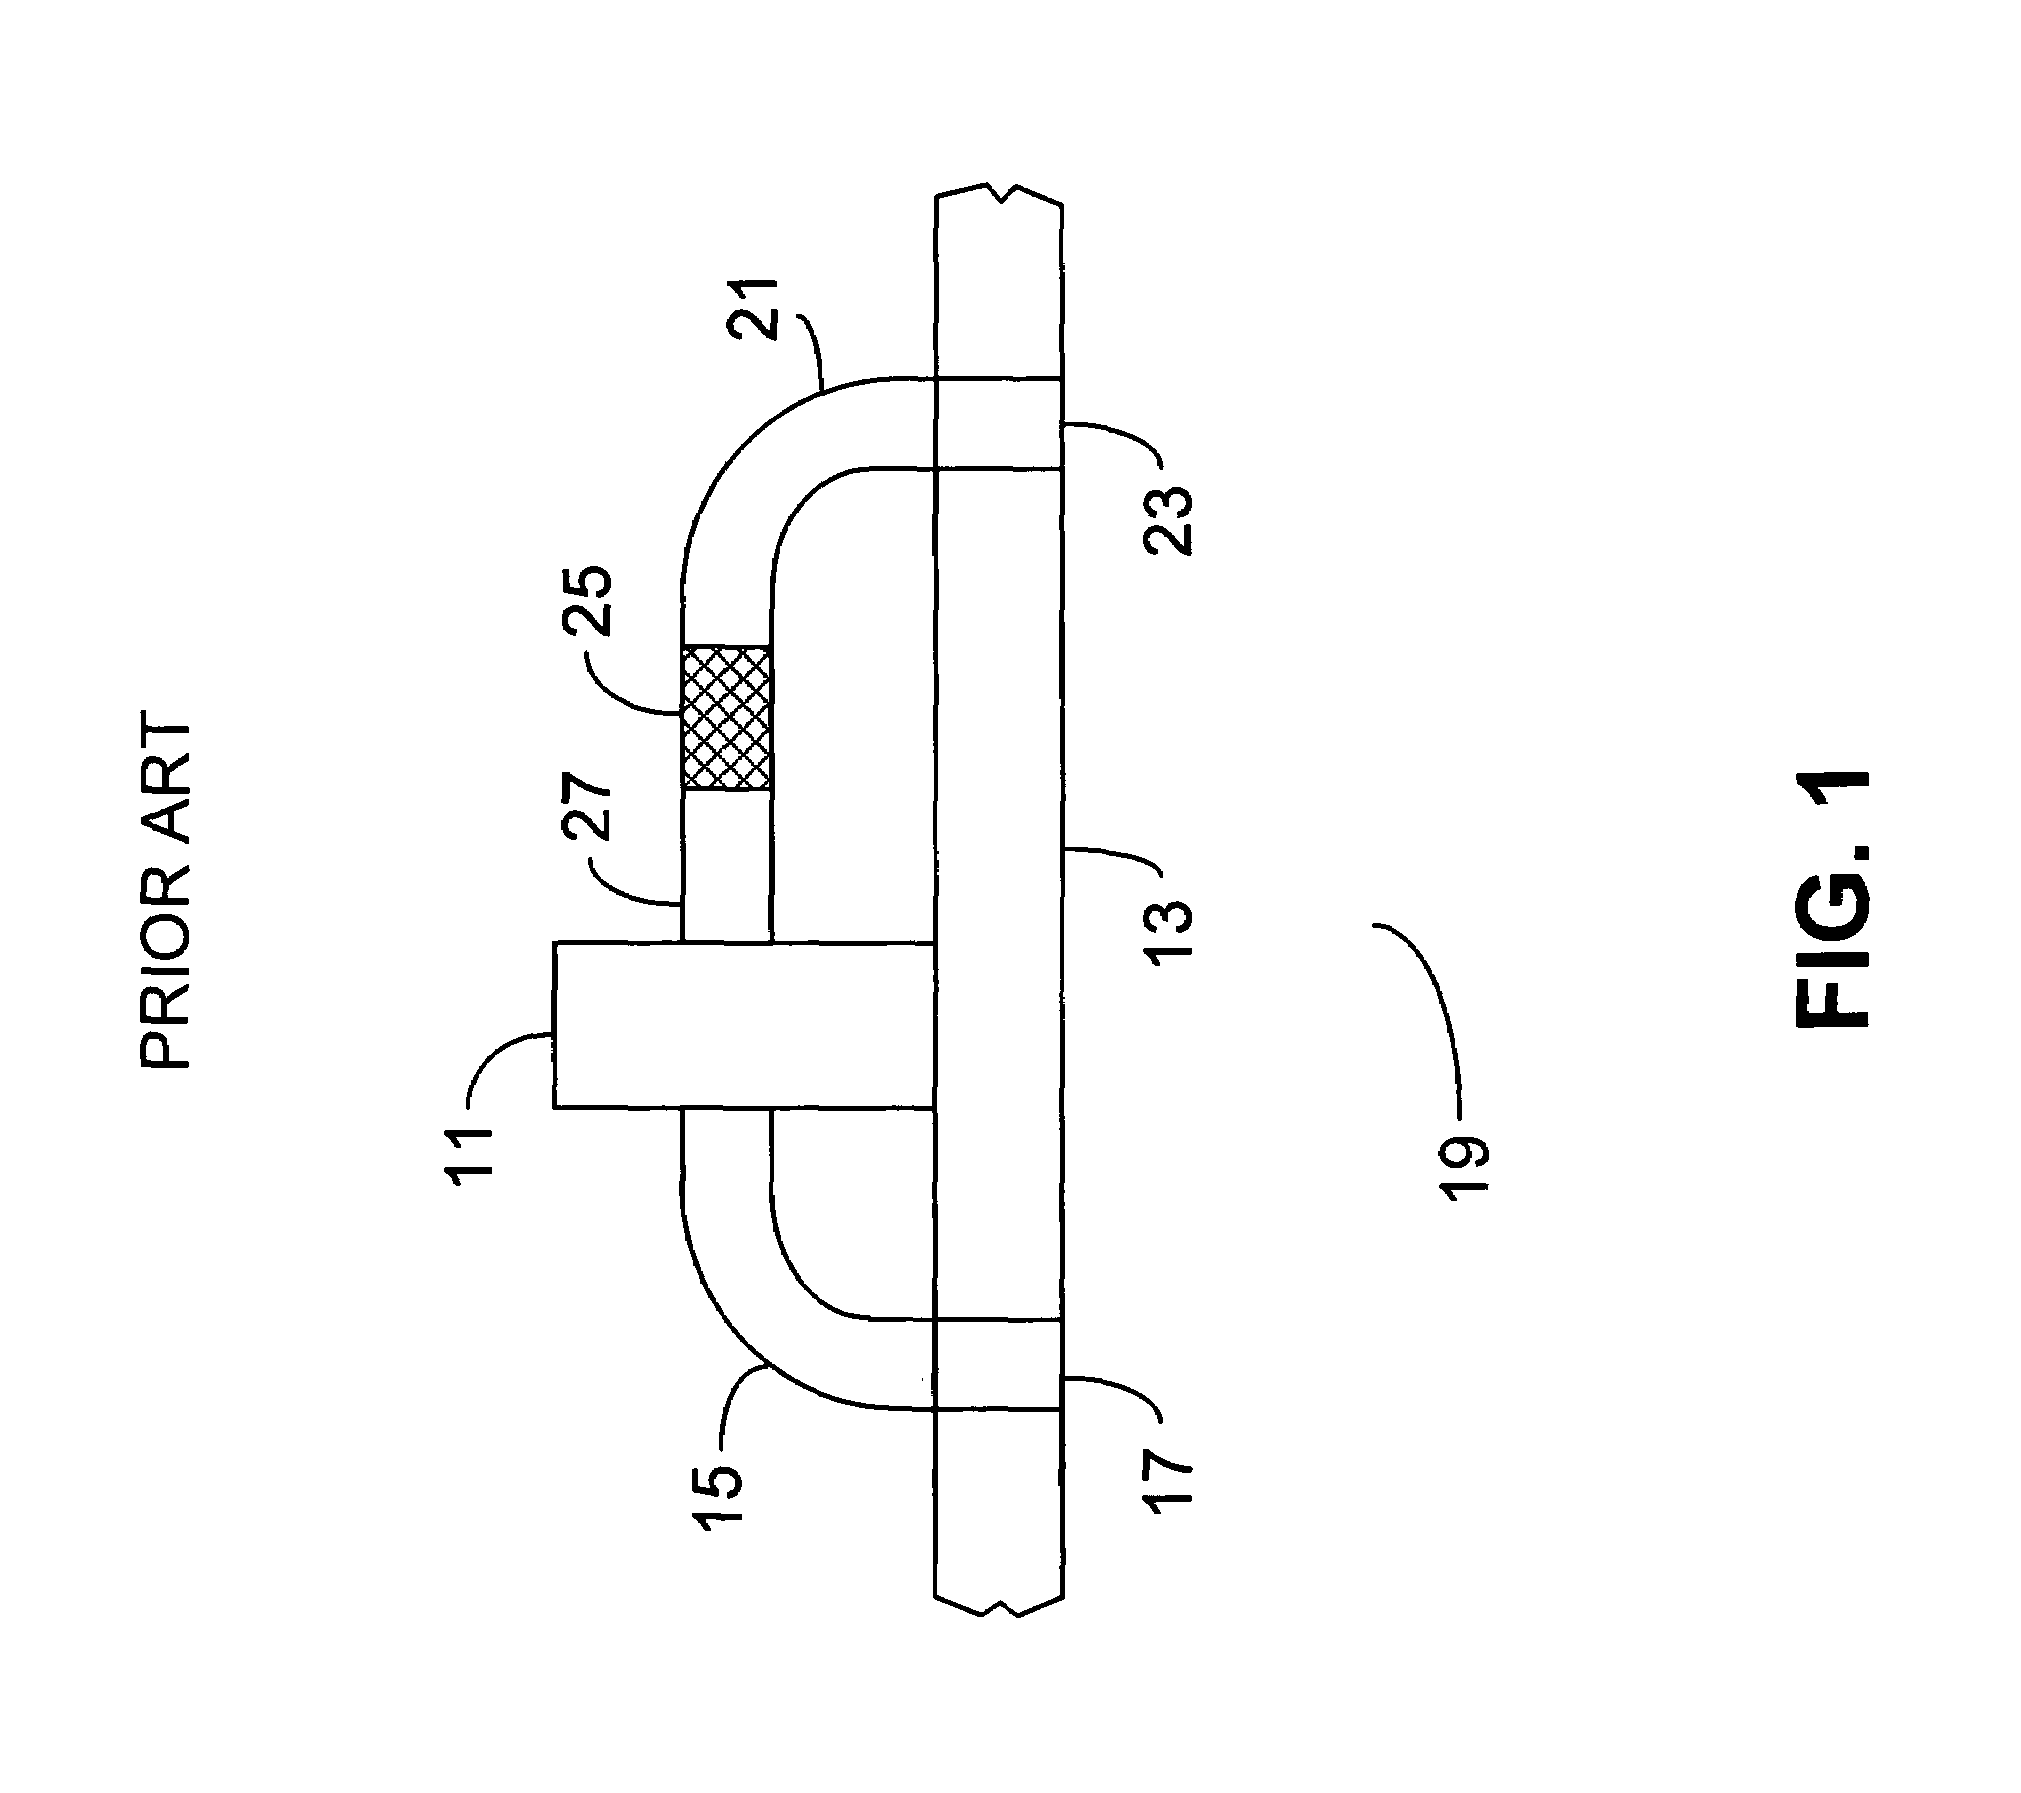 Directional microphone assembly for mounting behind a surface